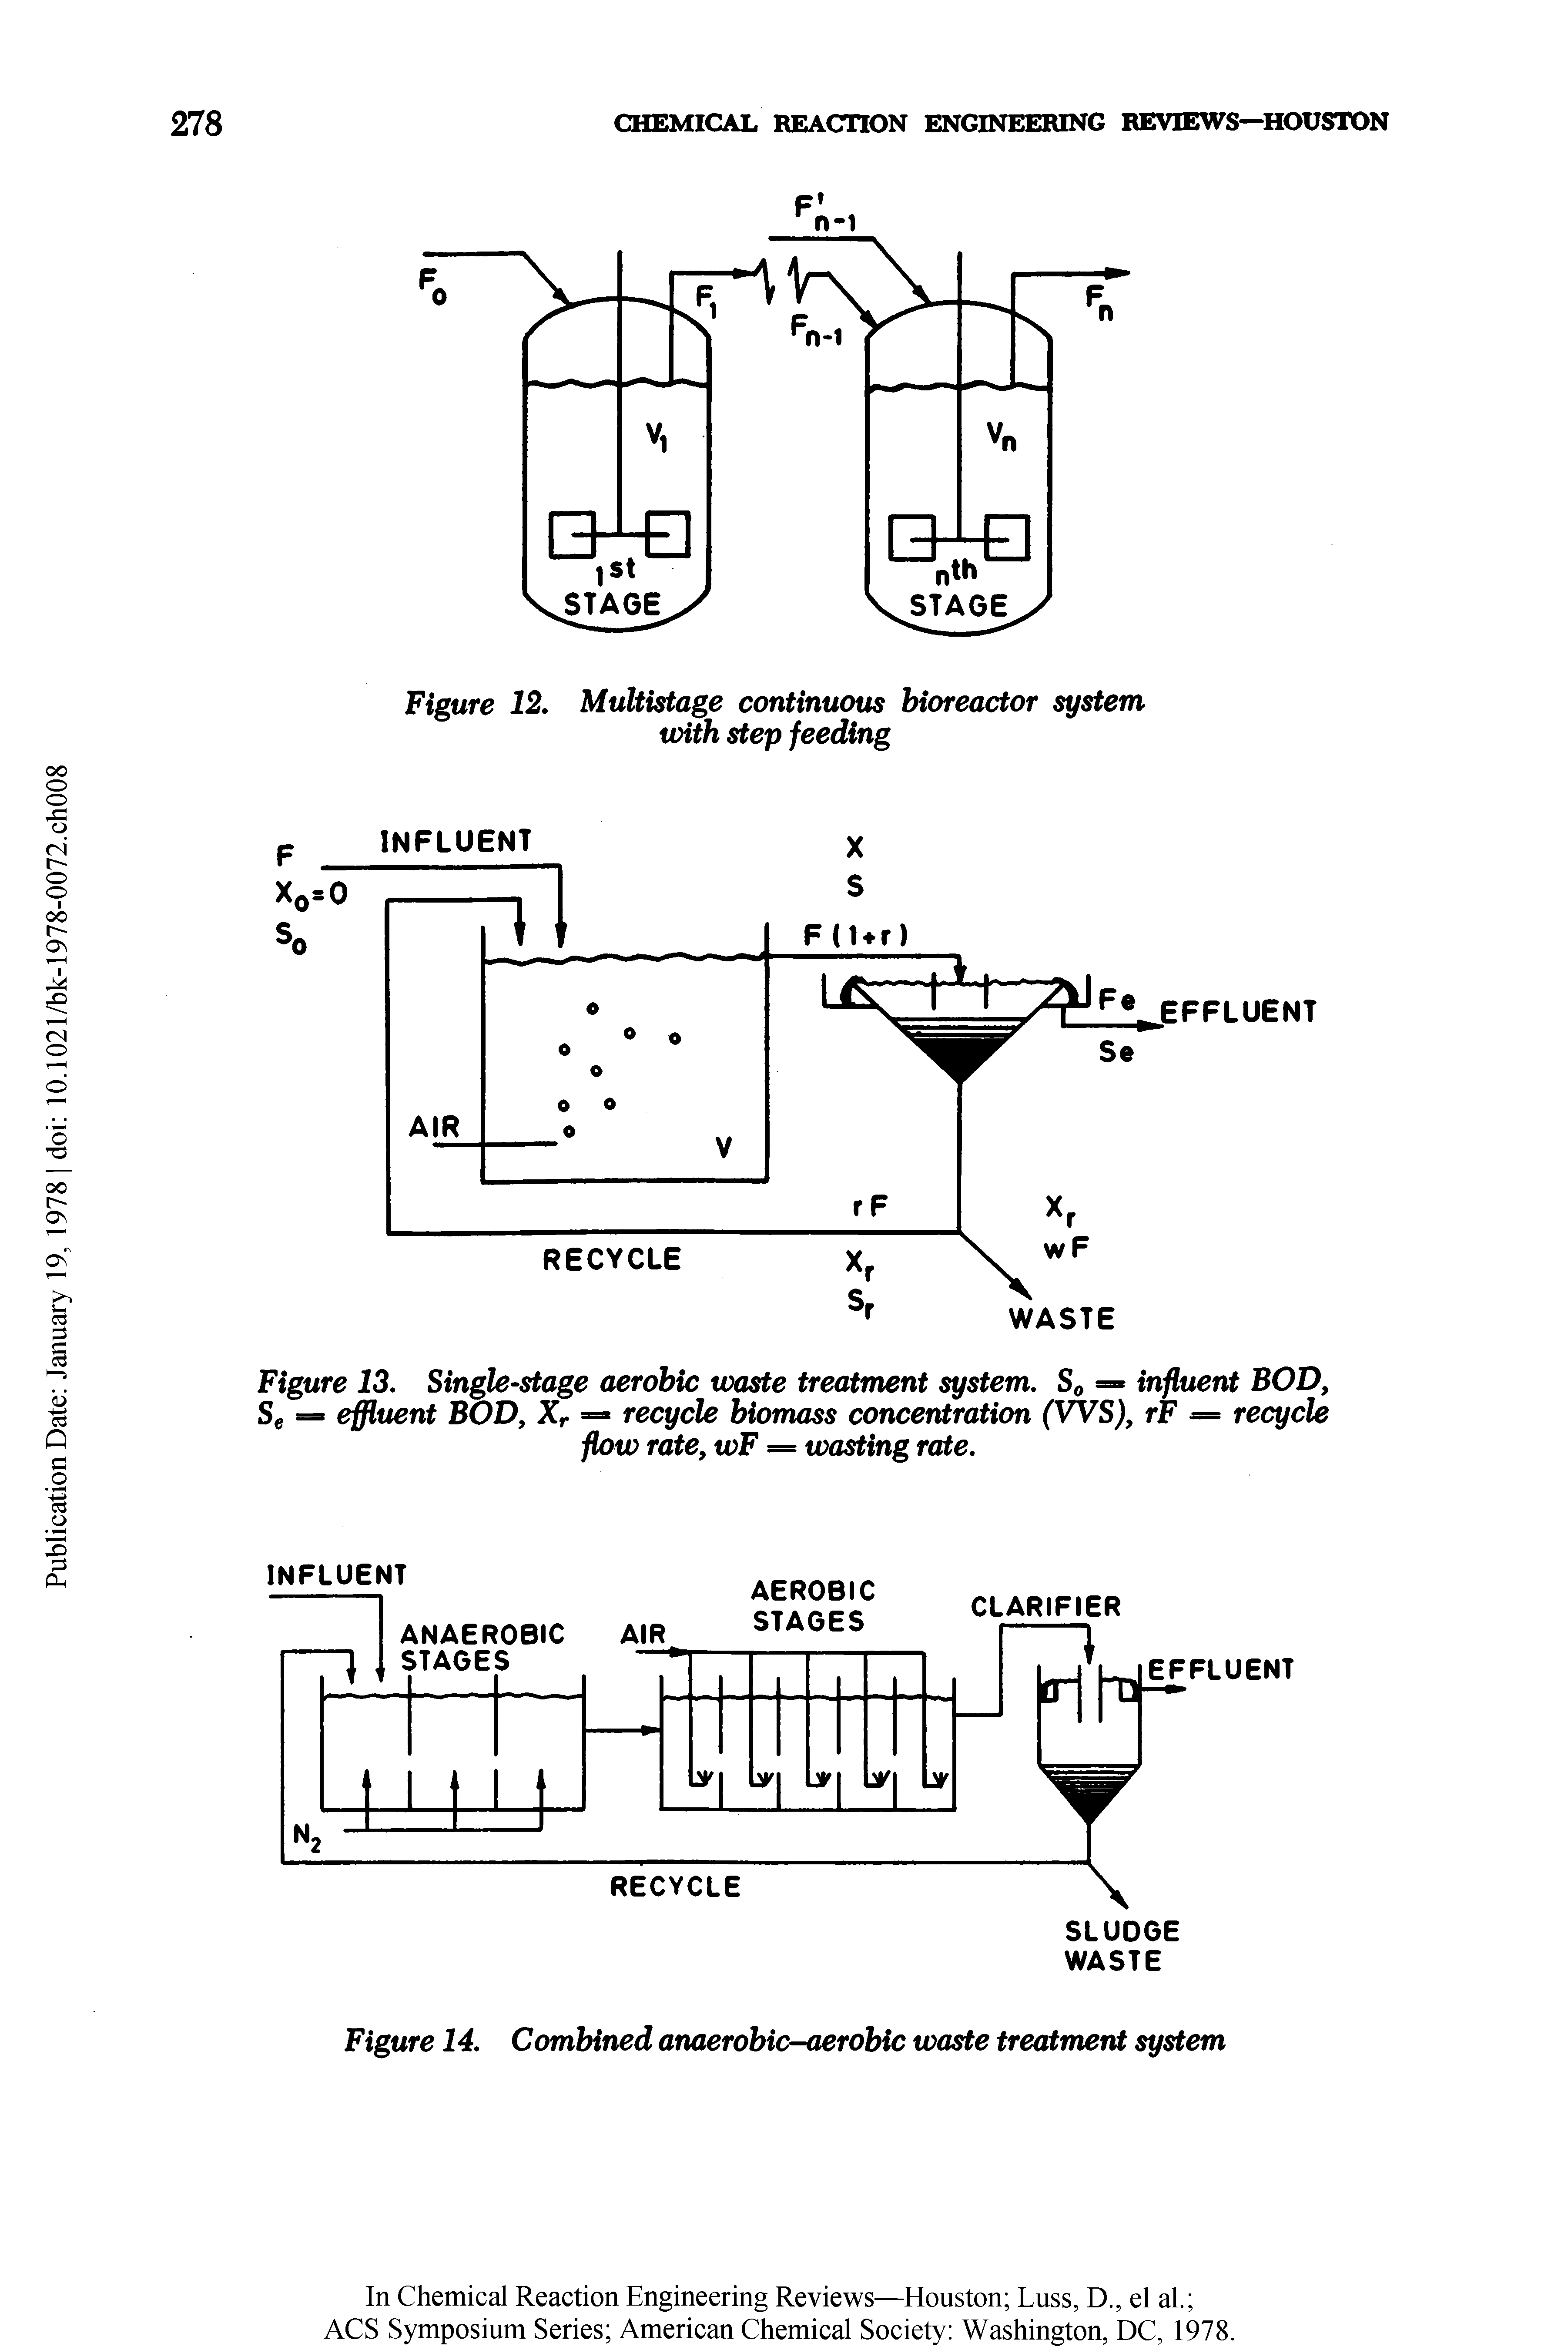 Figure 12. Multistage continuous bioreactor with step feeding...